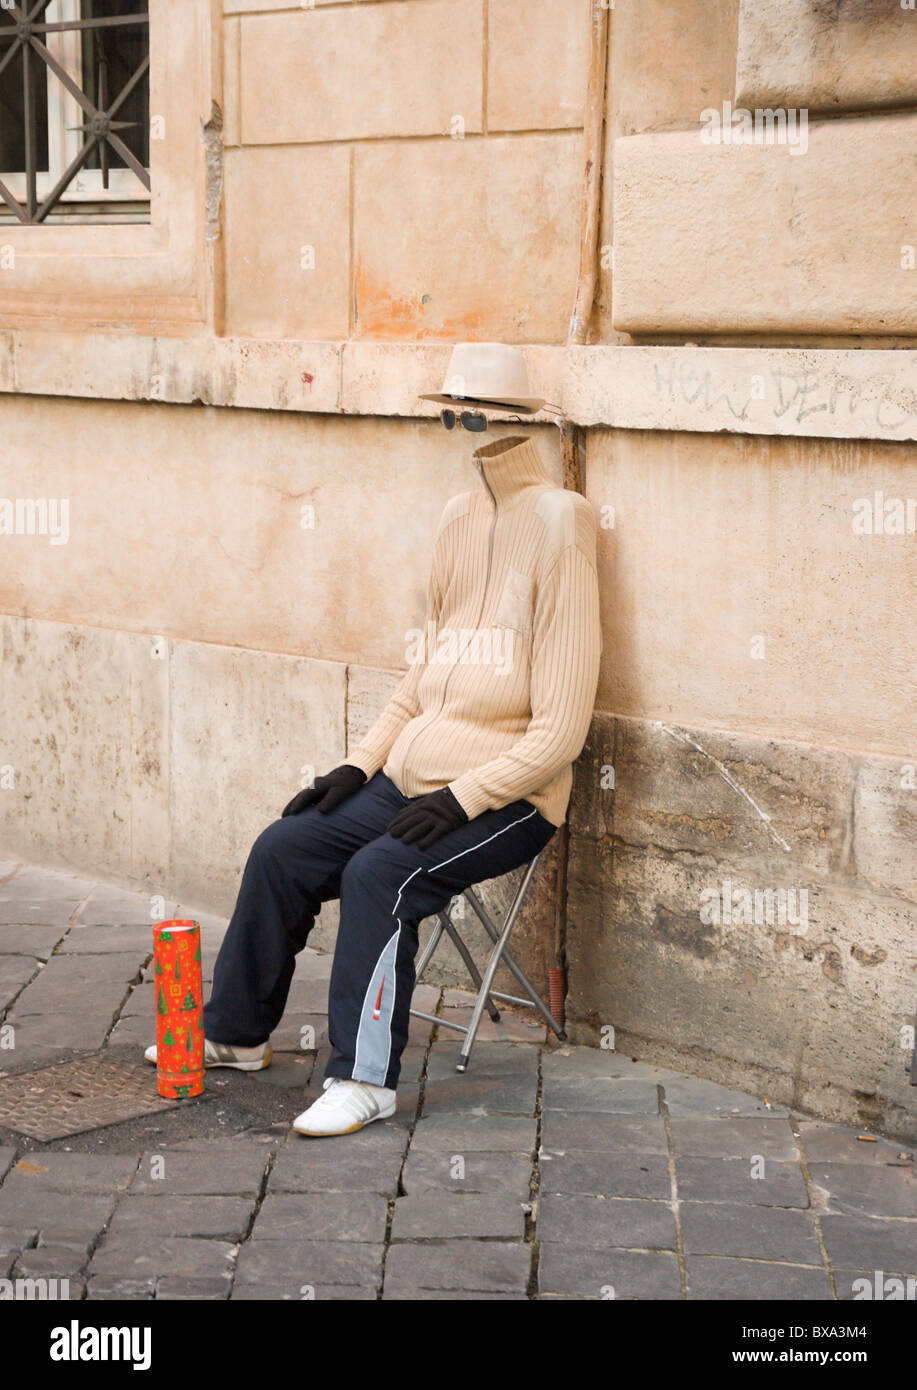 Rome, Pantheon, invisible man street performer Stock Photo